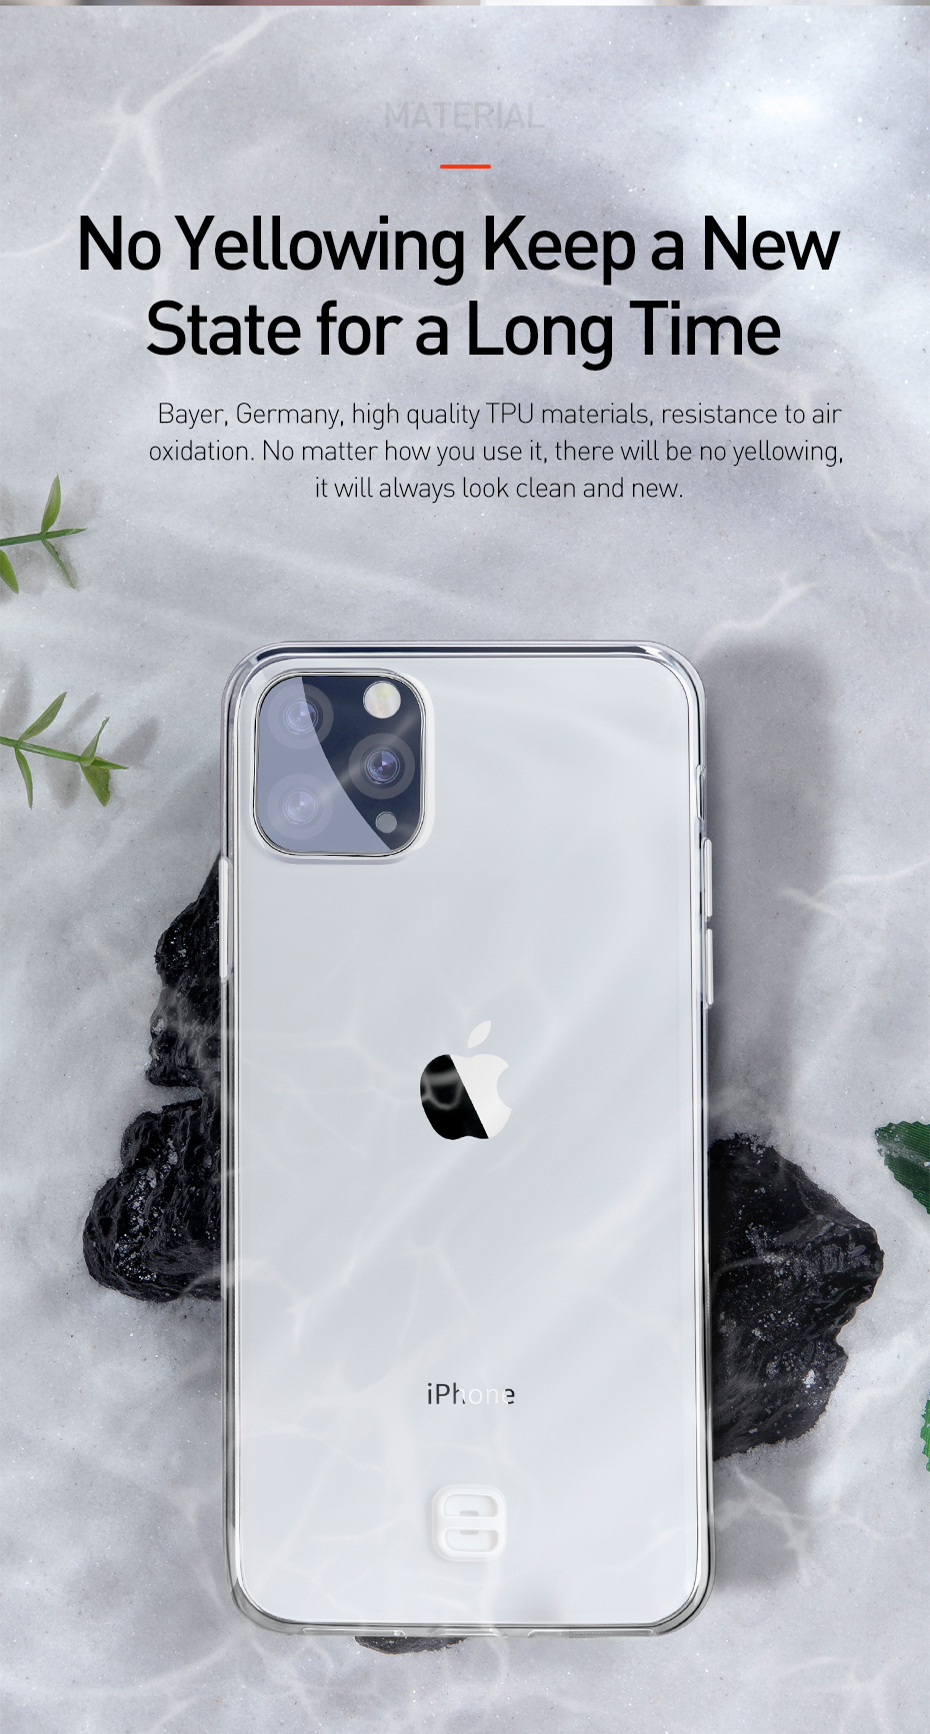 Baseus-Clear-Transparent-Soft-TPU-Protective-Case-with-Lanyard-For-iPhone-11-Pro-58-Inch-1586365-10